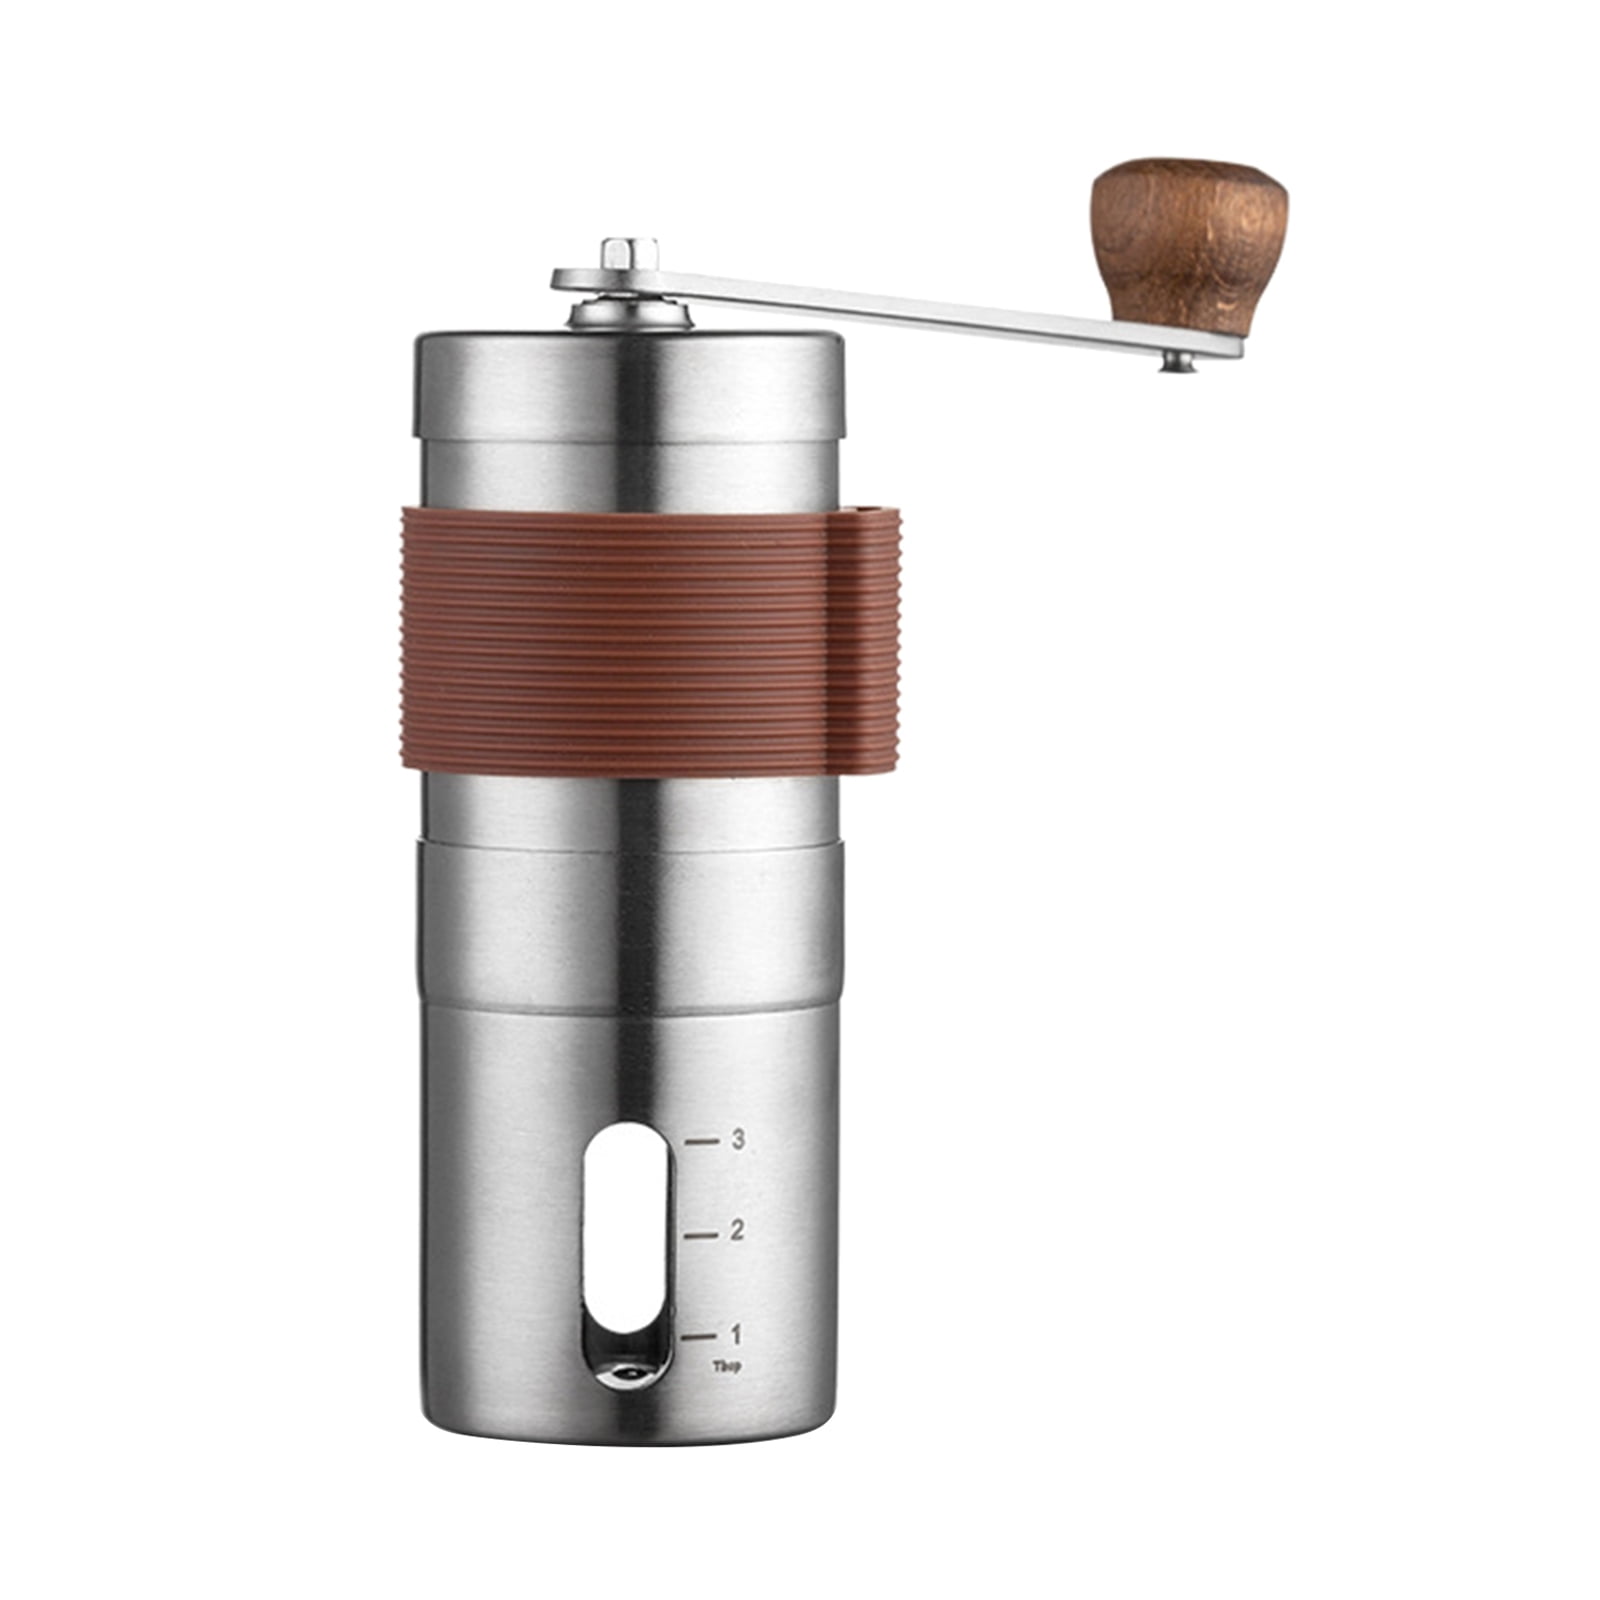 Stainless steel Conical Burr Mill Kitcoff BUNDLE Manual Coffee Grinder 